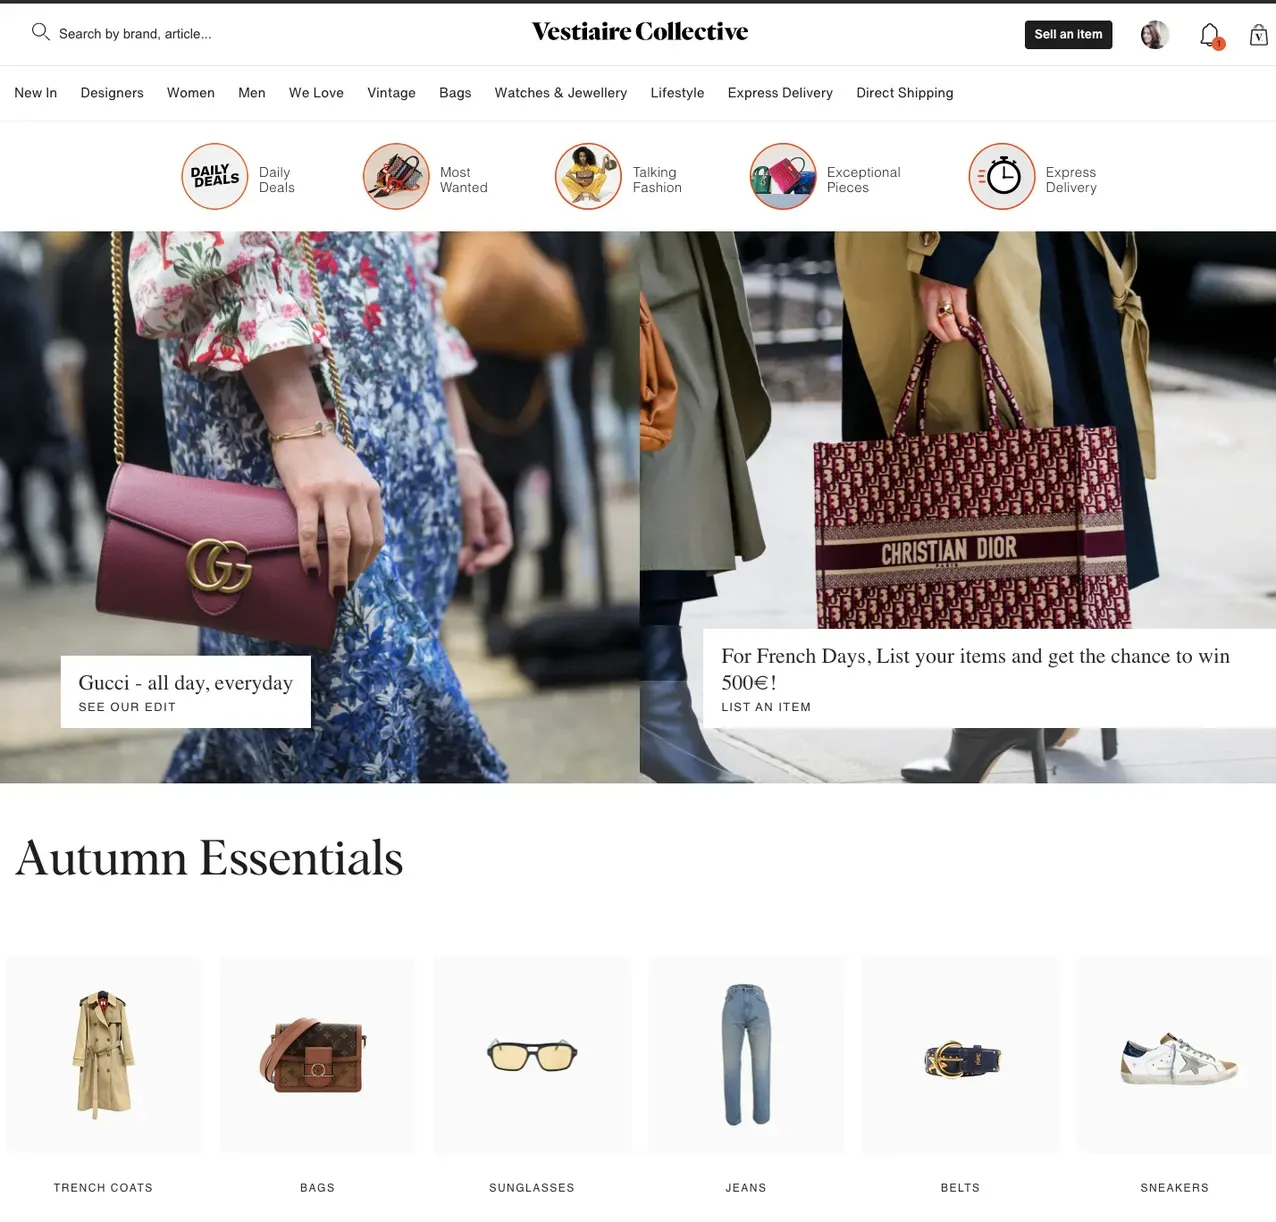 Vestiaire Collective is an example of a pyramid structure that uses search filters to refine and curate product categories.